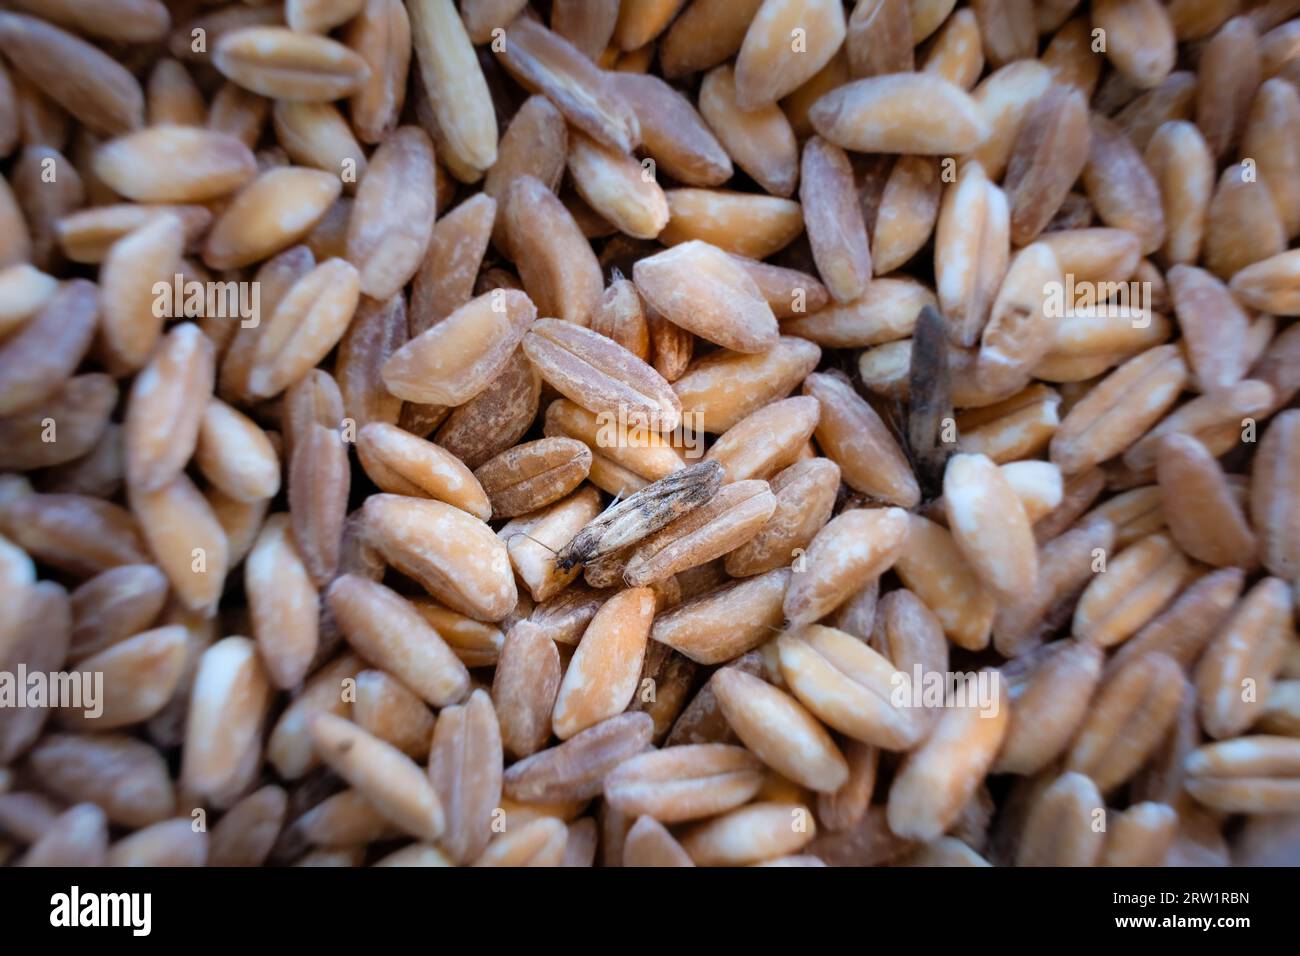 Camoflauged insect in pile of raw farro Stock Photo